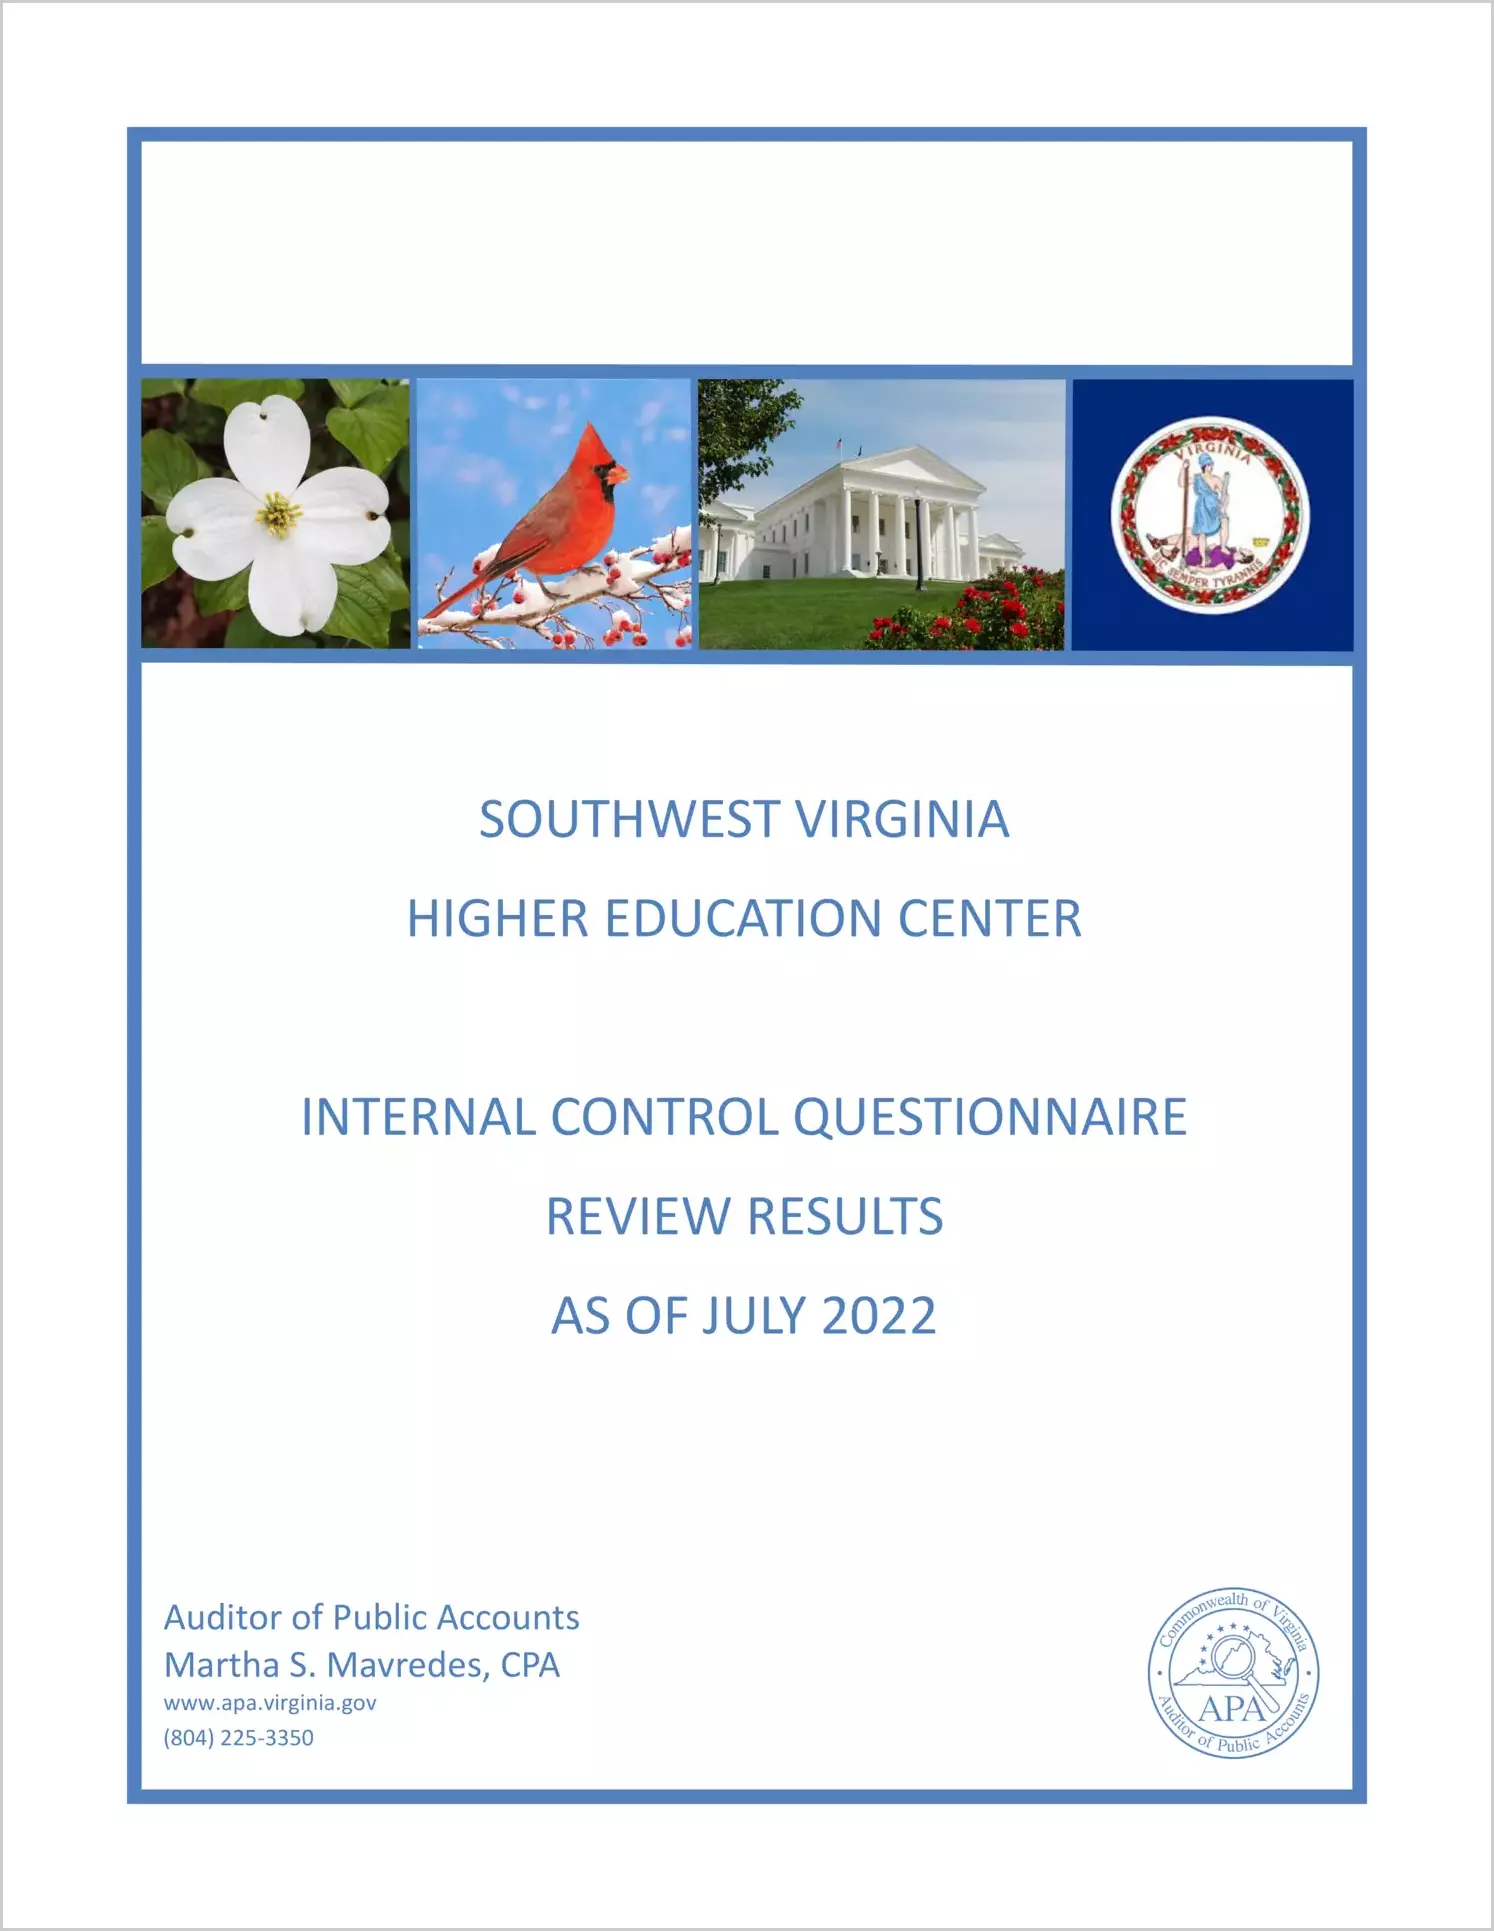 Southwest Virginia Higher Education Center Internal Control Questionnaire Review Results as of July 2022